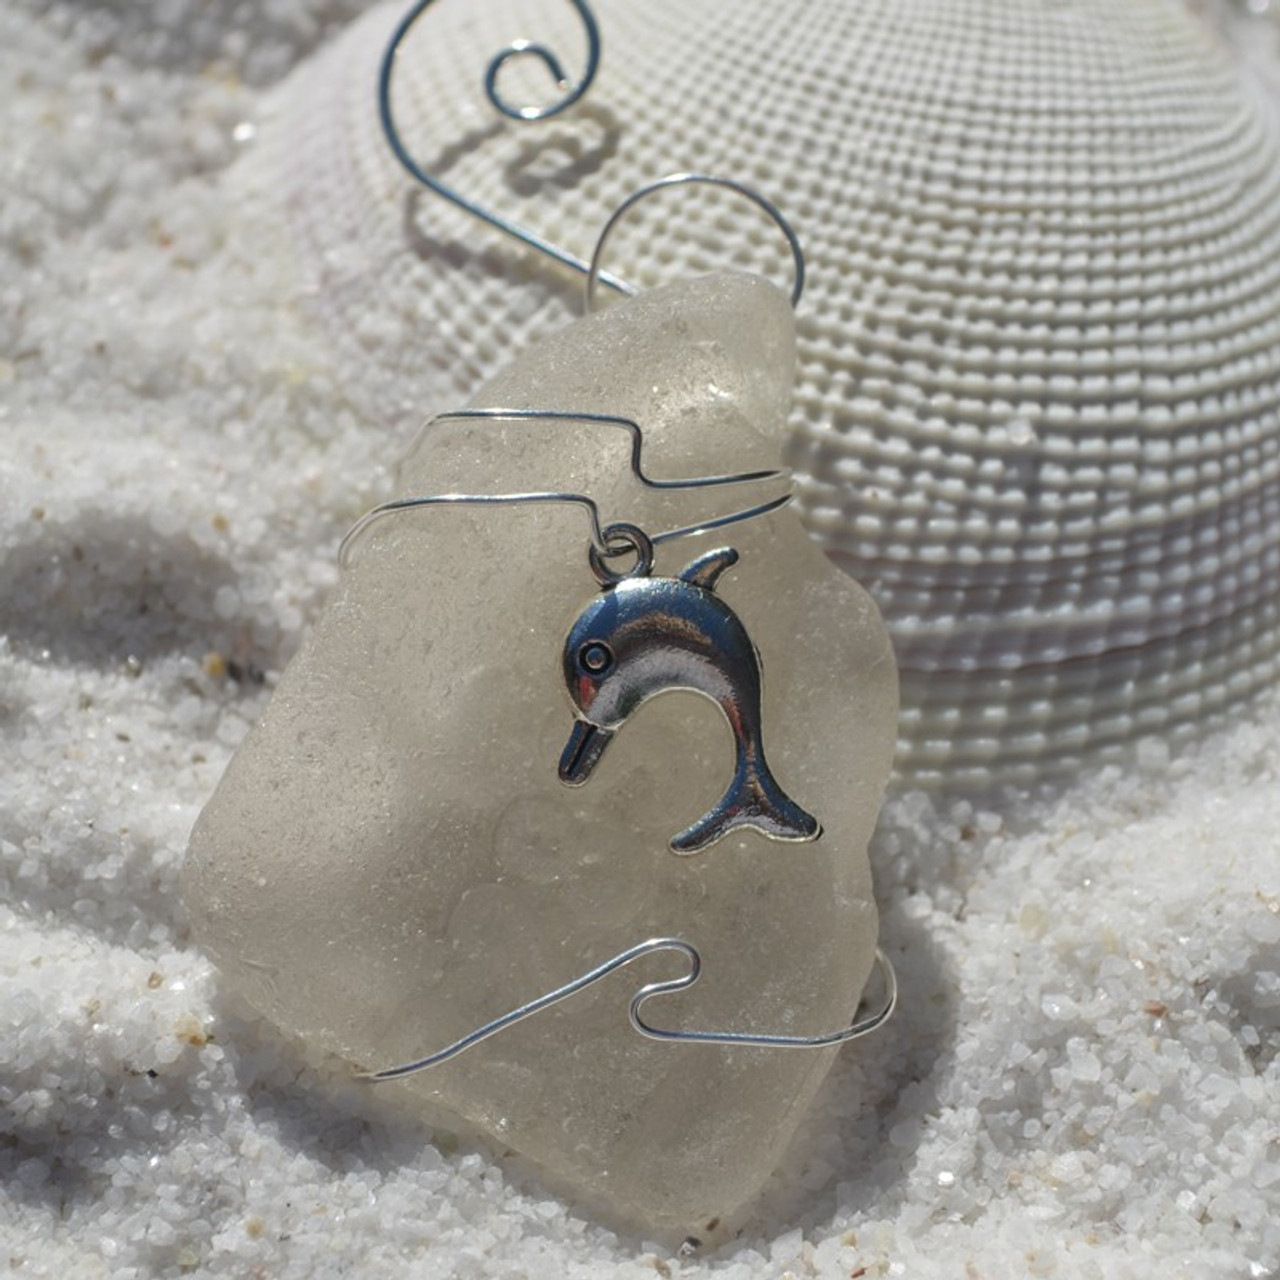 Surf Tumbled Sea Glass Dolphin Ornament - Choose Your Color Sea Glass Frosted, Olive Green, and Brown - Made to Order